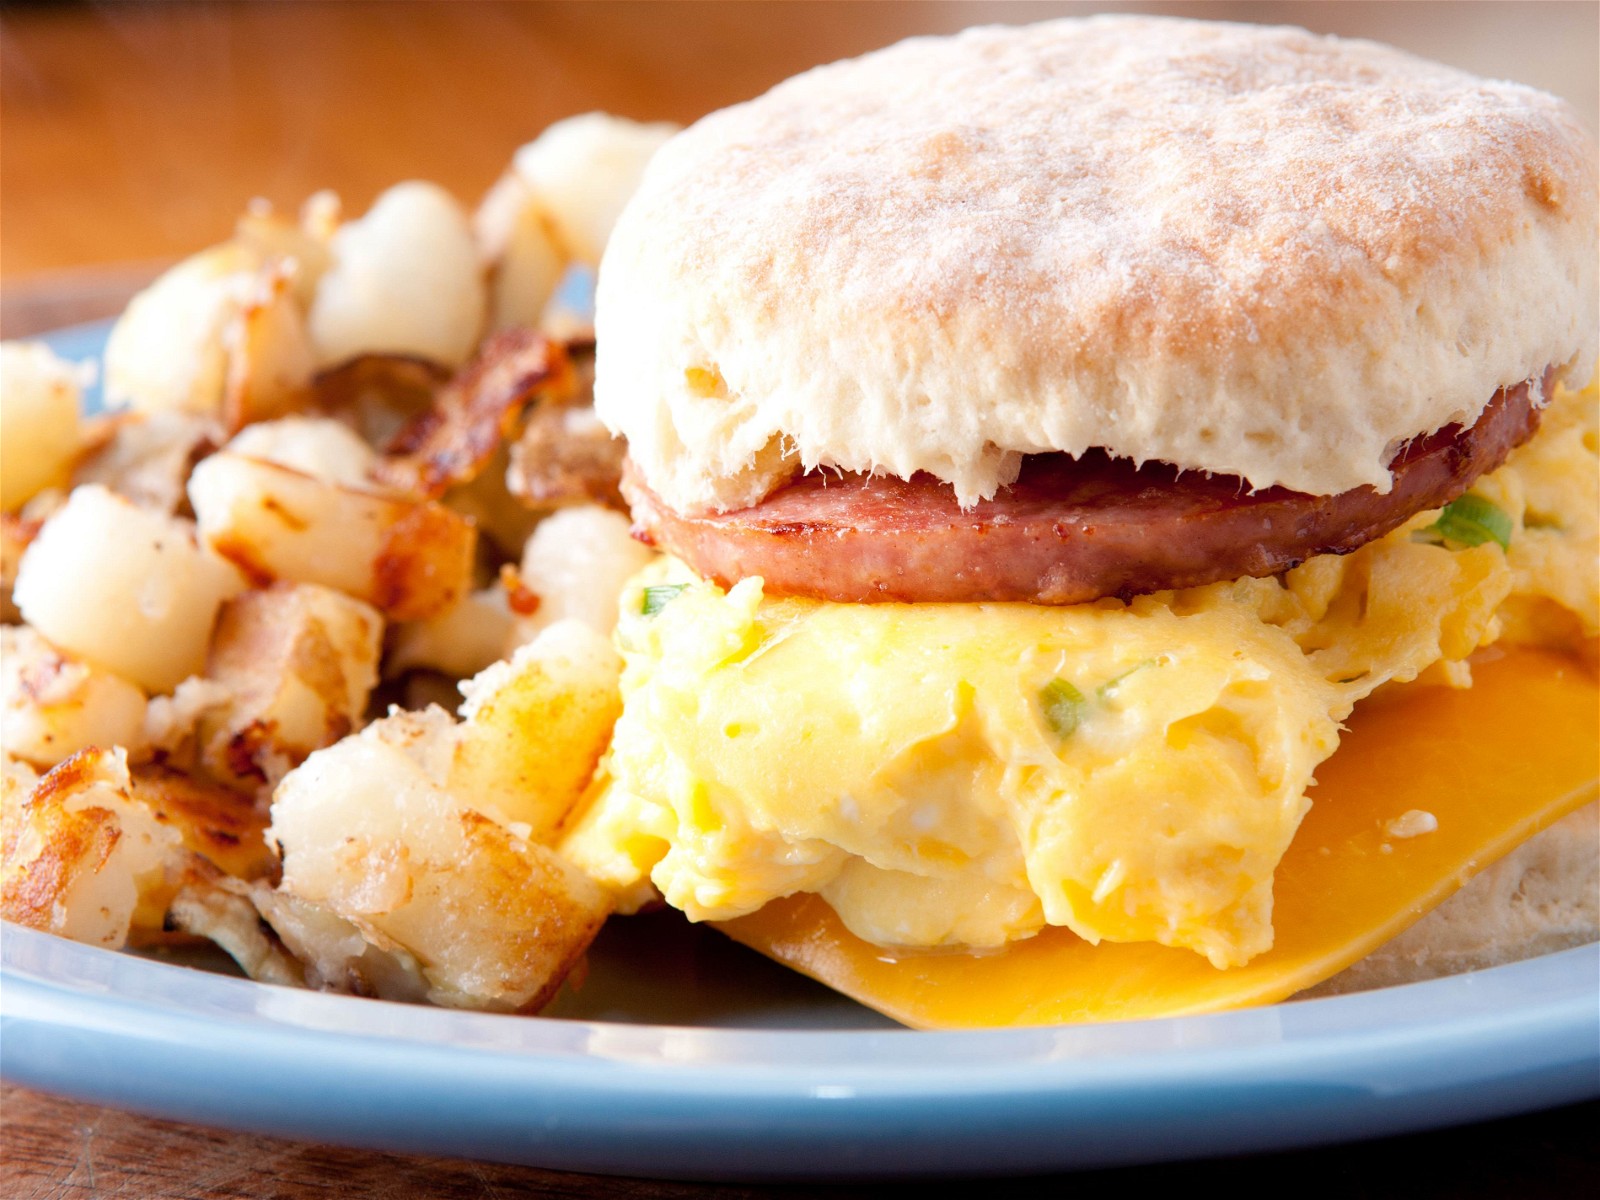 Electric Pressure Cooker Ham and Egg Grilled Breakfast Sandwiches